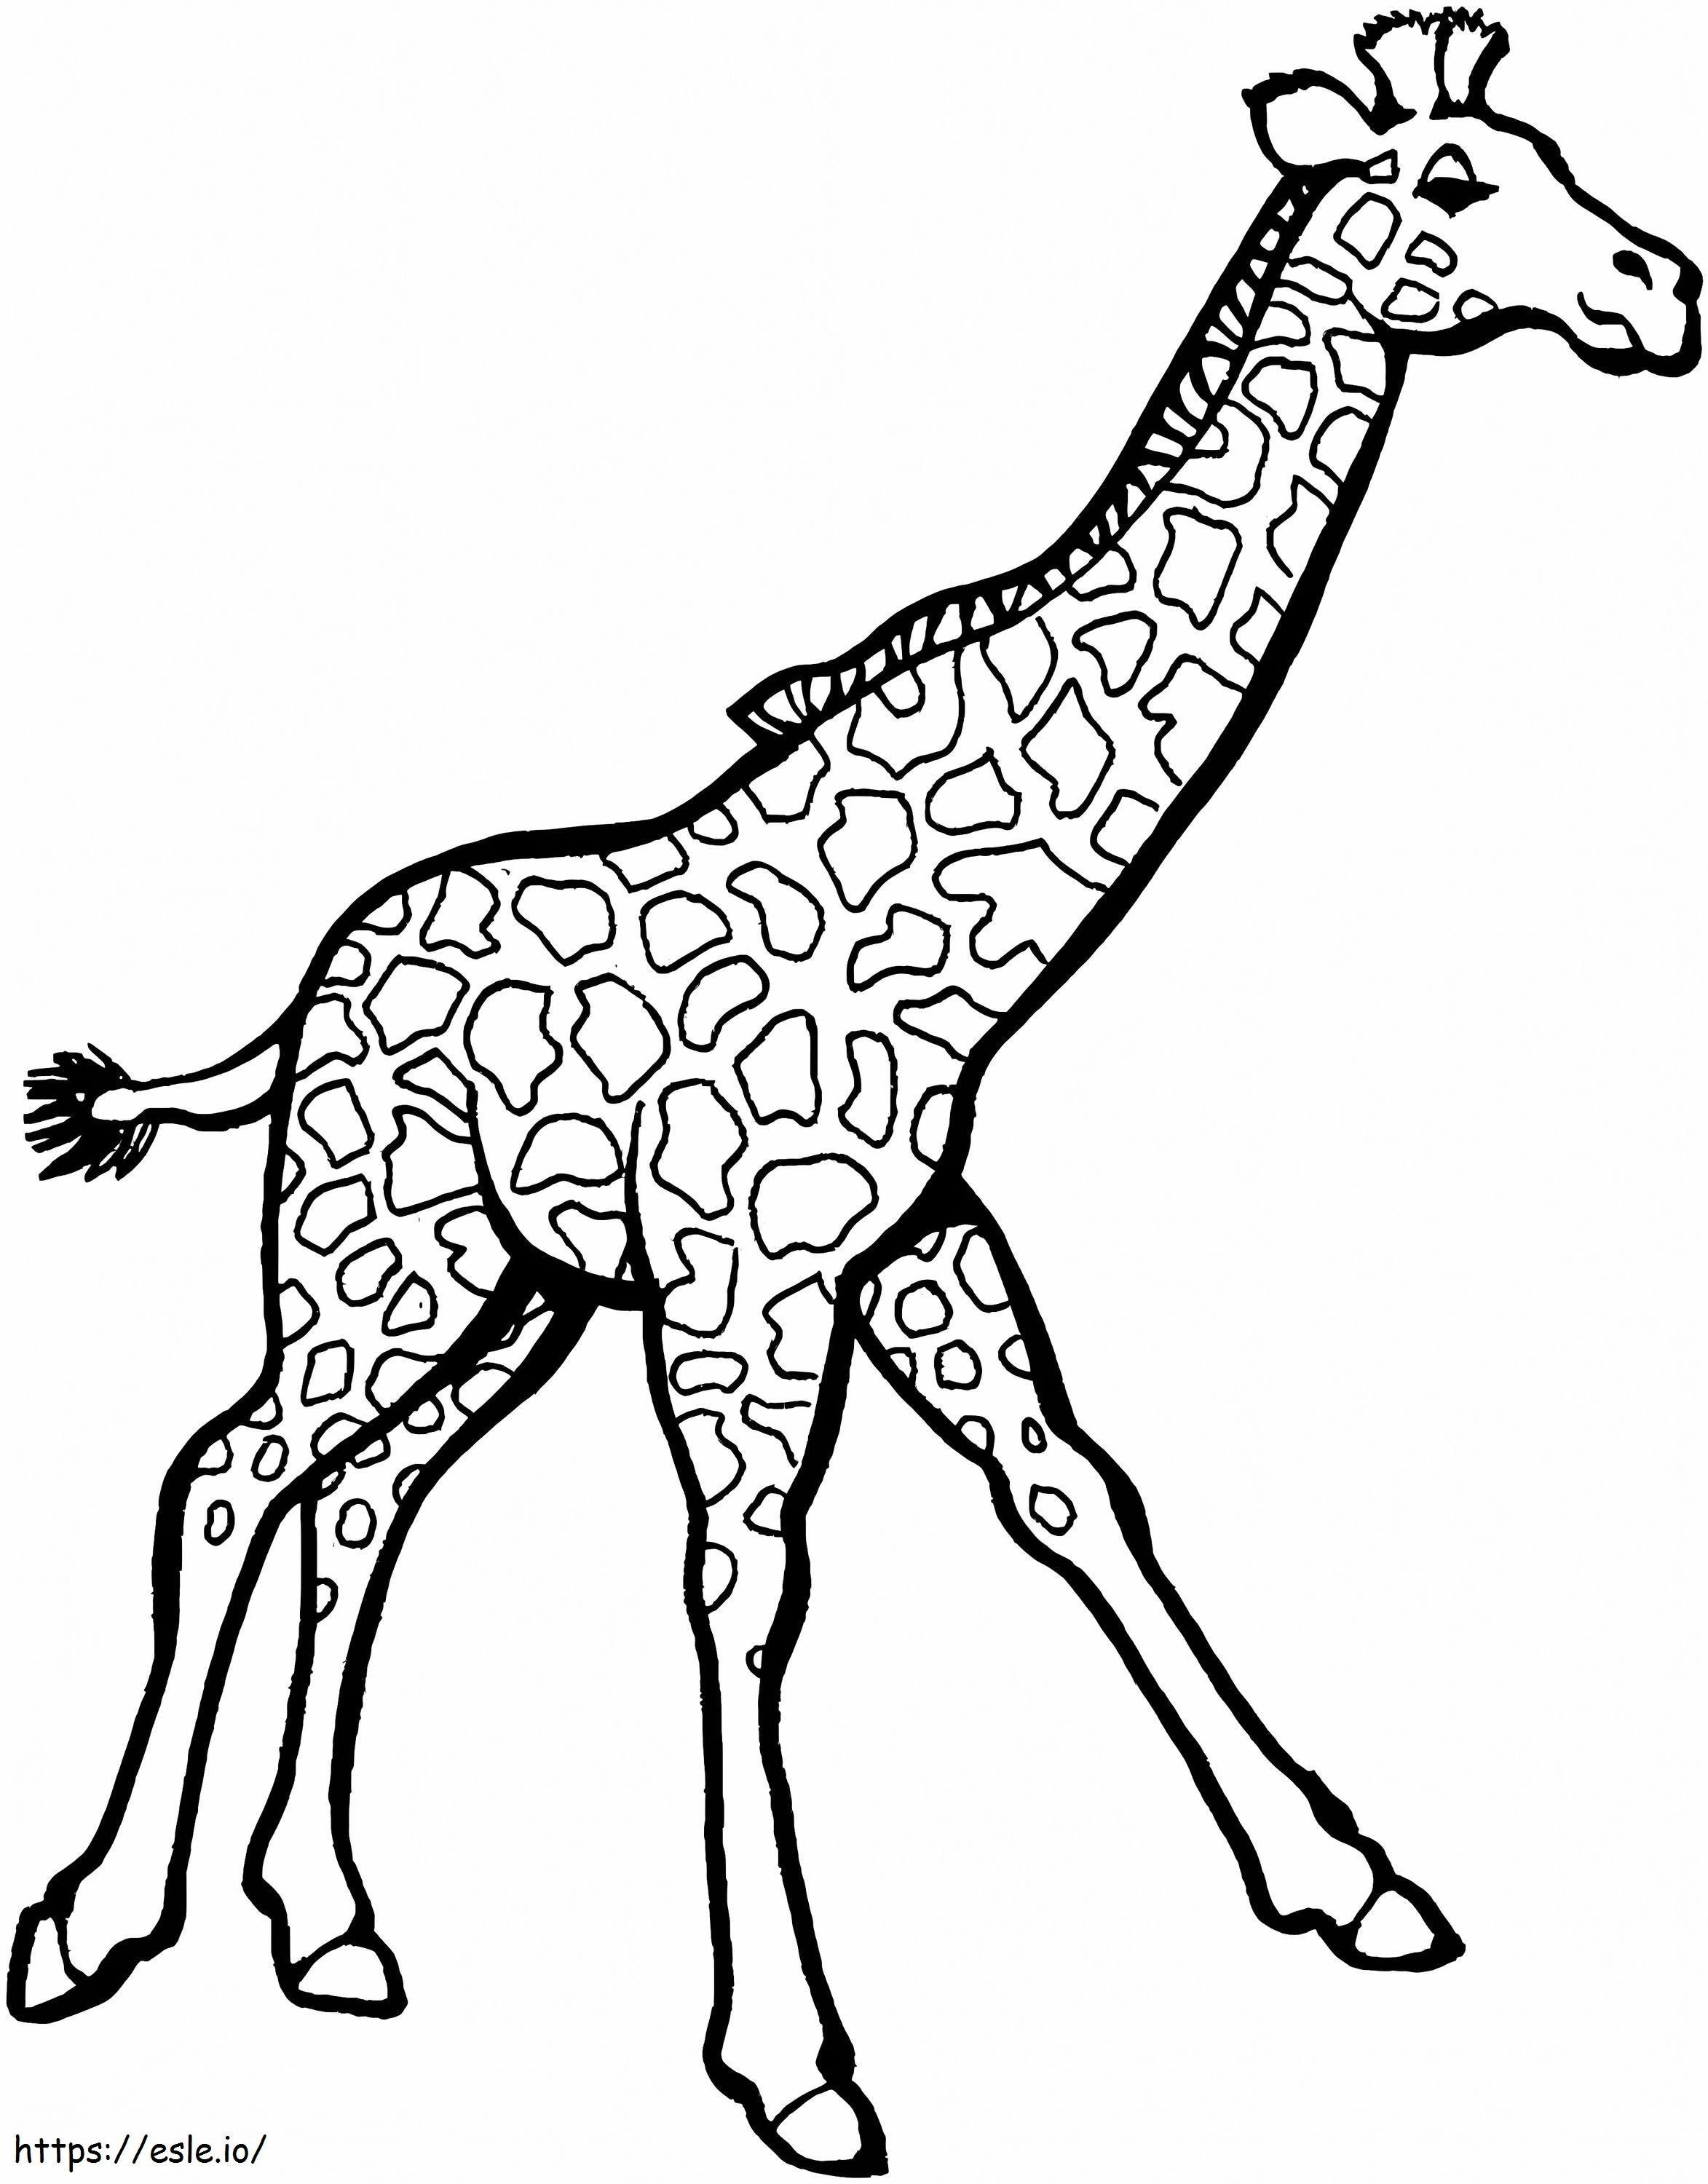 Normal Giraffe coloring page